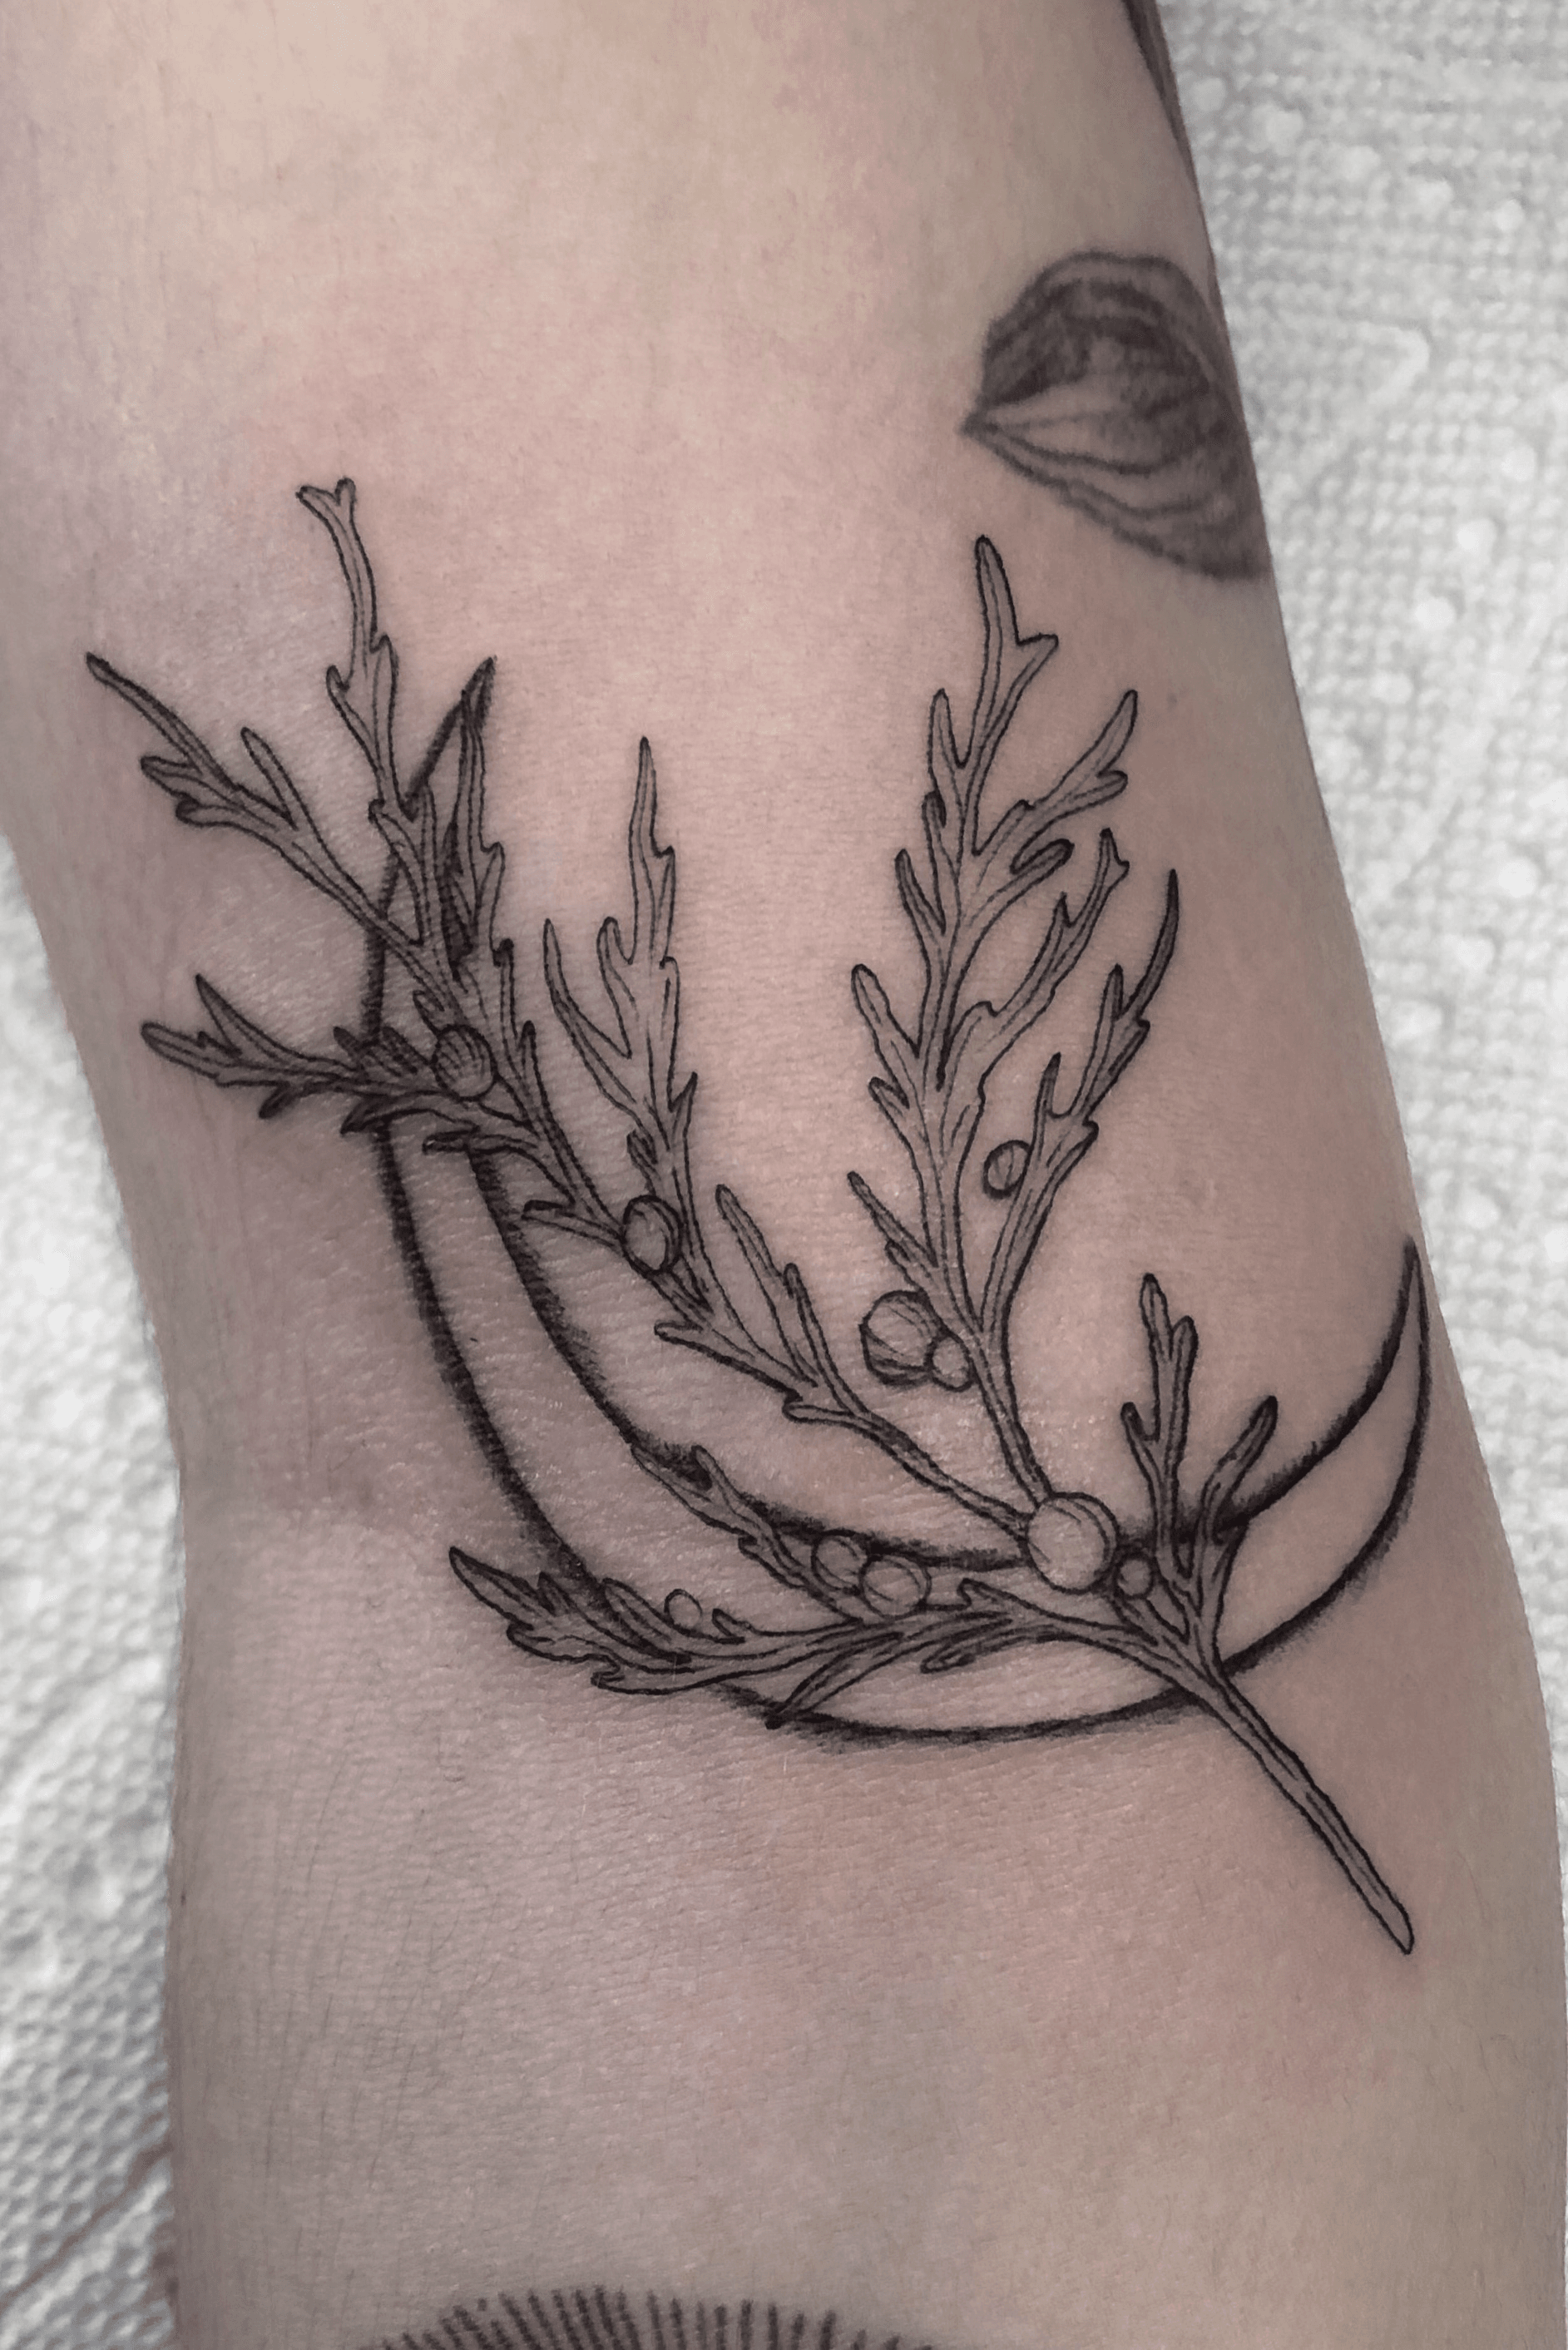 Juniper branch by Charity Critchfield at Tiger Claw Tattoo in Salt Lake  City UT  rtattoos